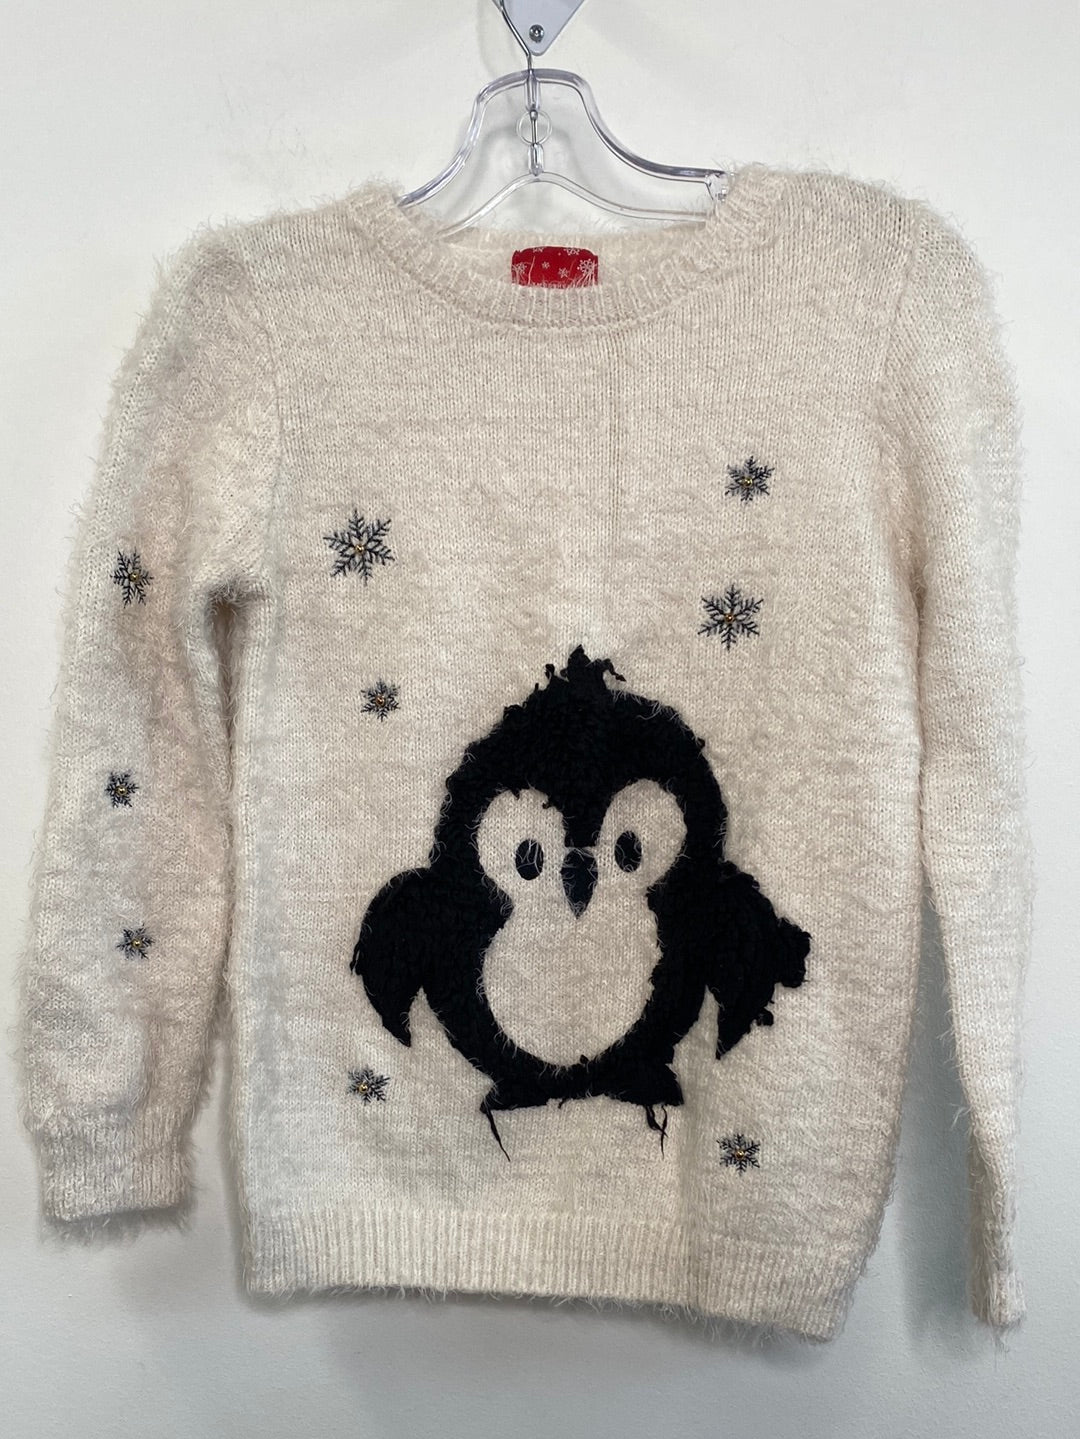 Atmosphere Penguin Knitted Sweater (8)